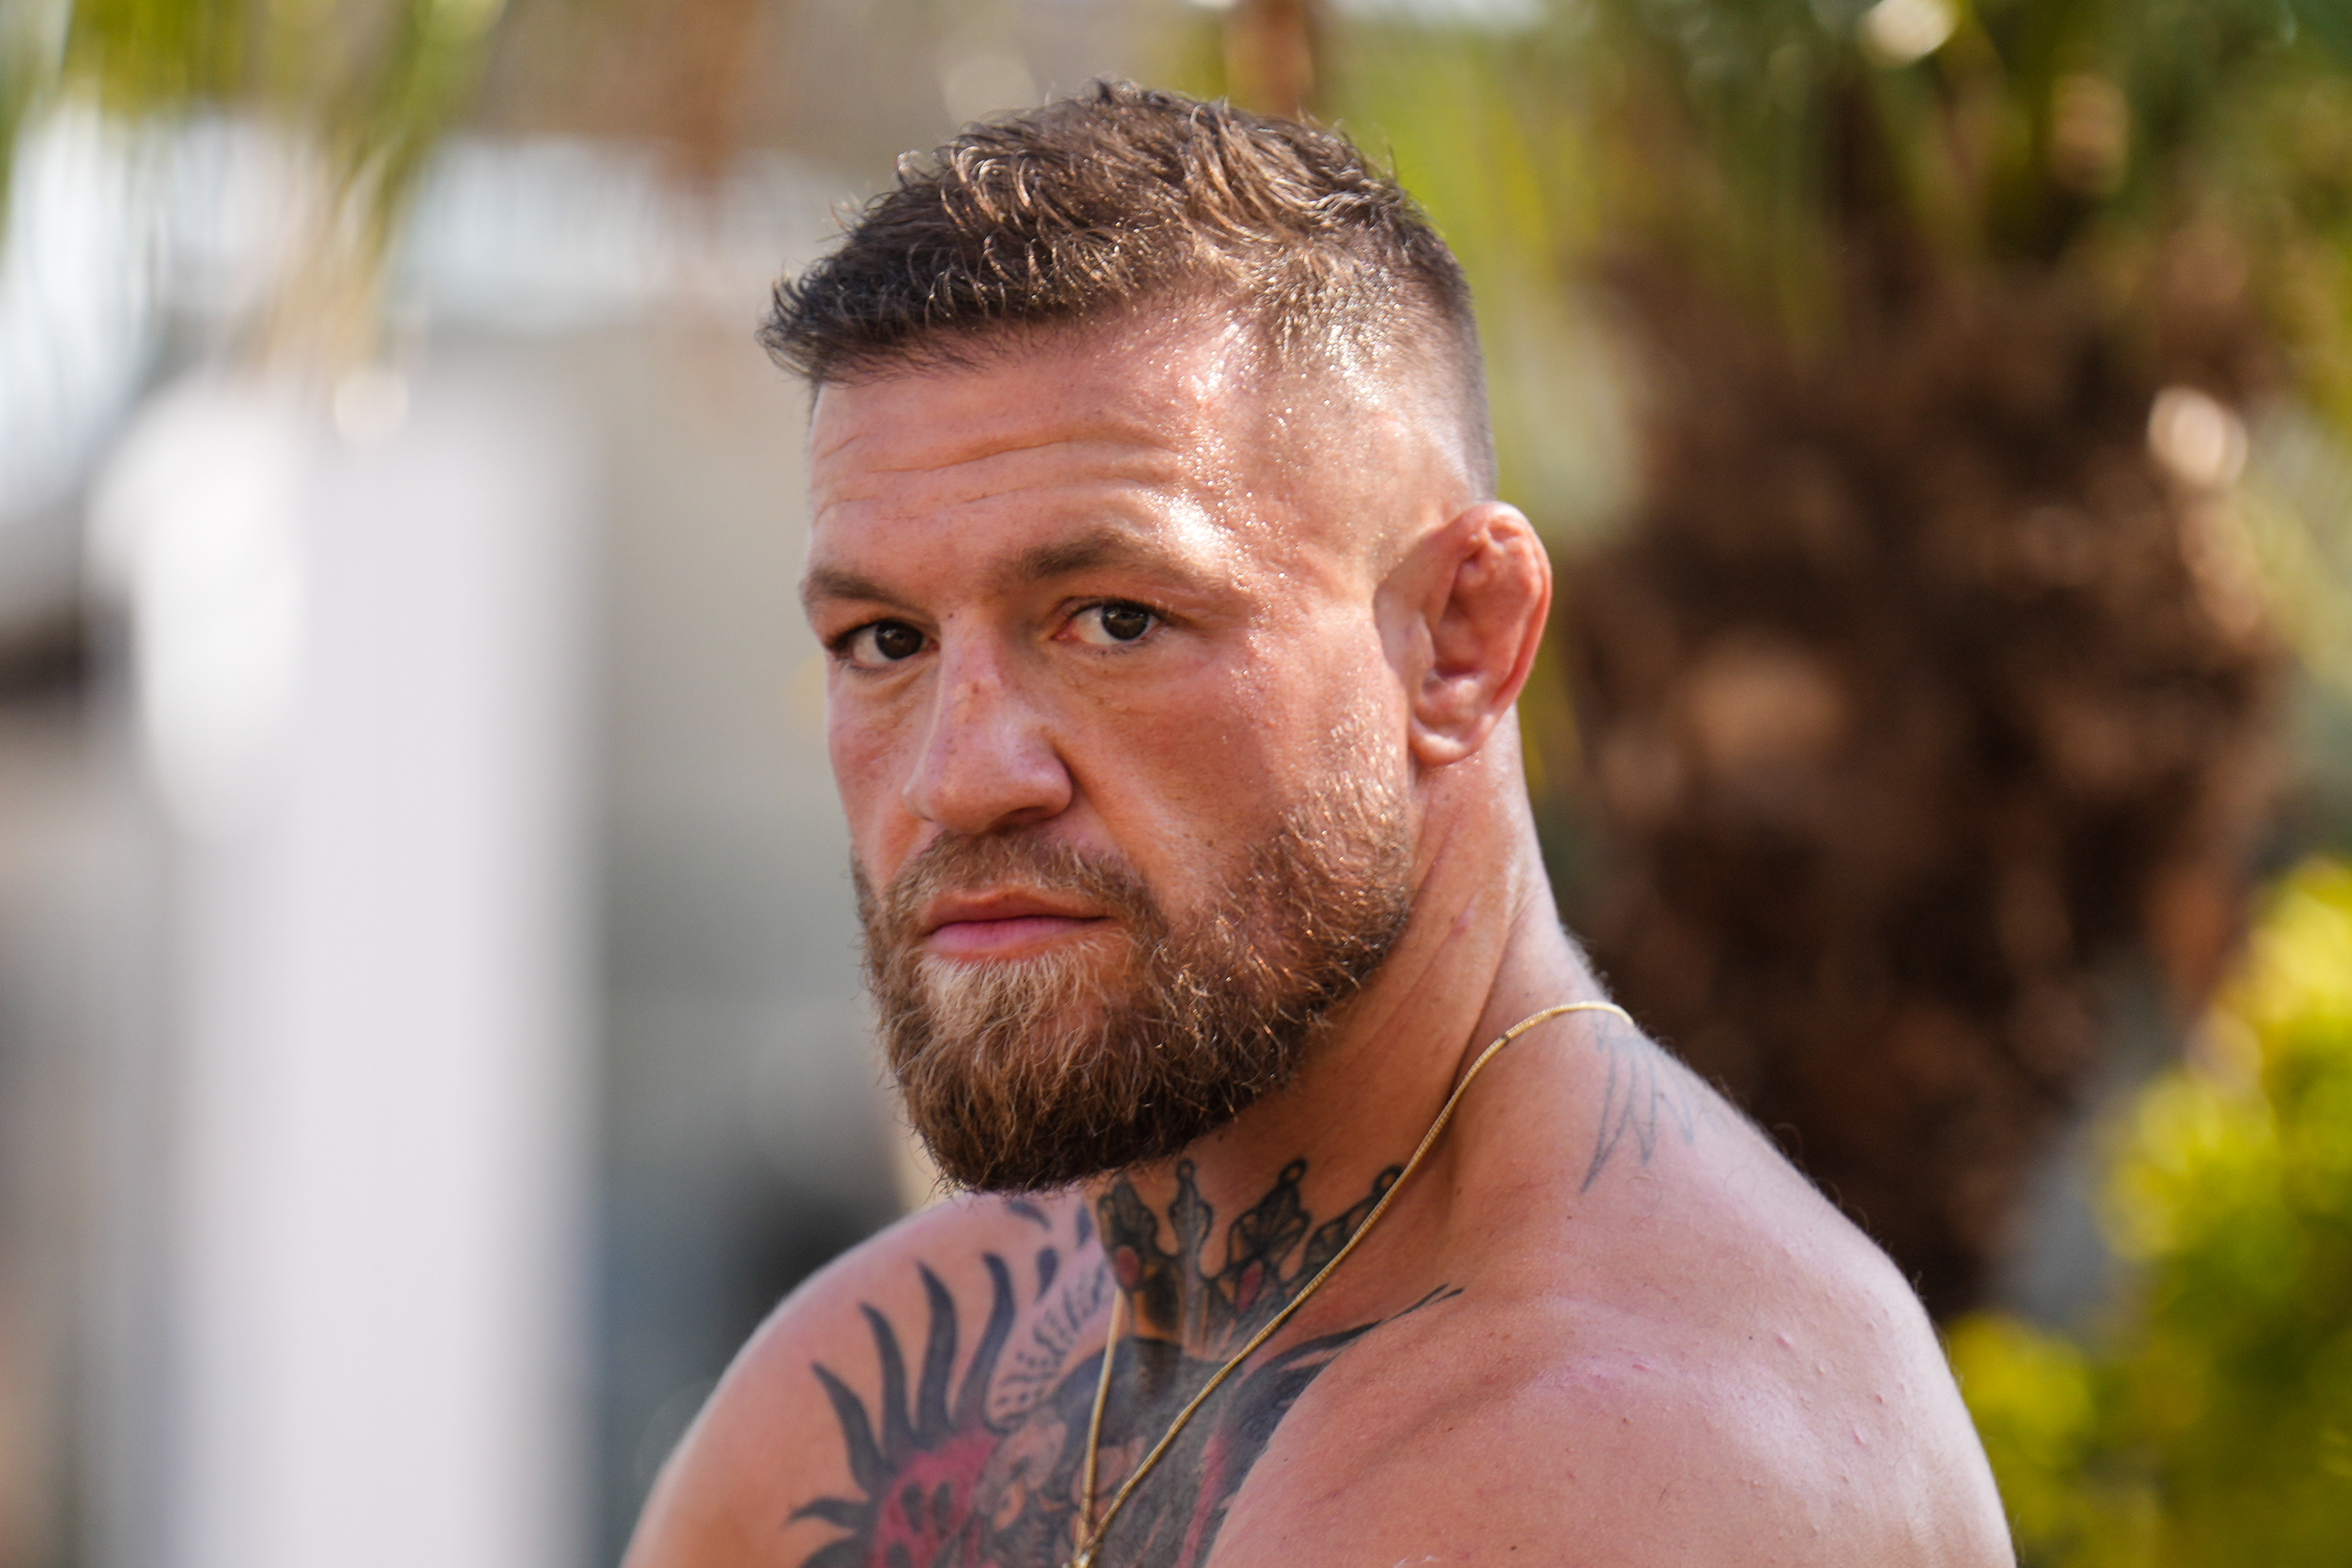 McGregor is the latest UFC star called out by a boxer